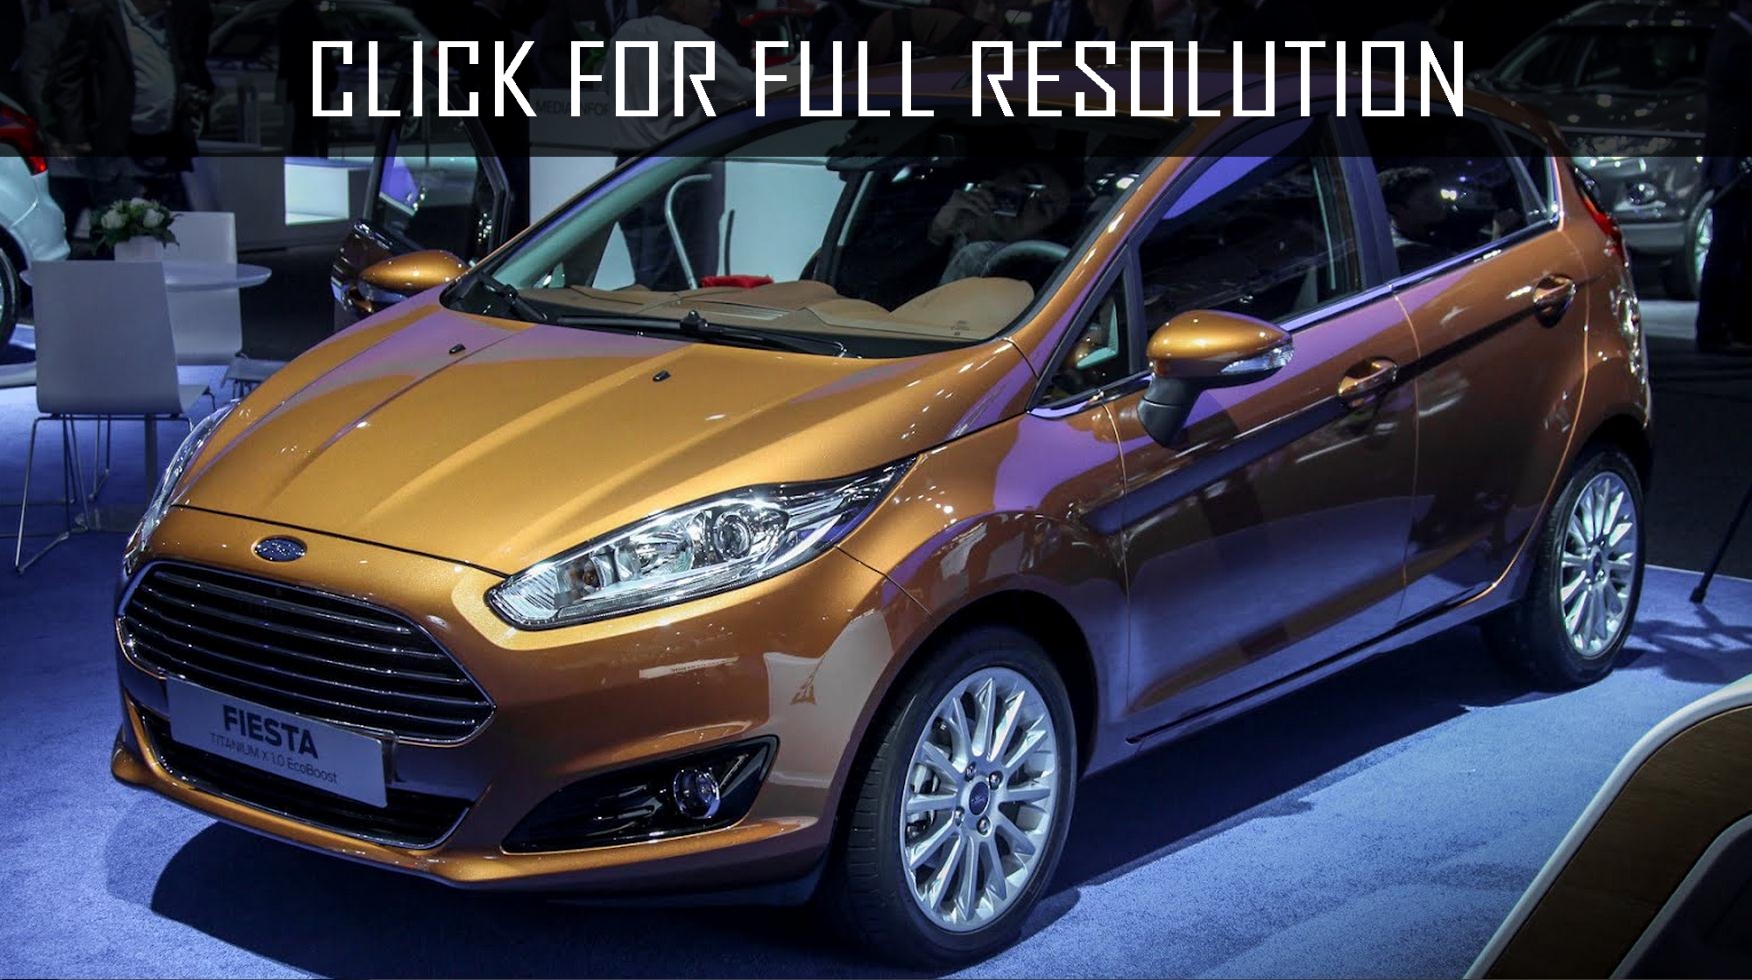 12 Ford Fiesta Titanium Best Image Gallery 4 13 Share And Download